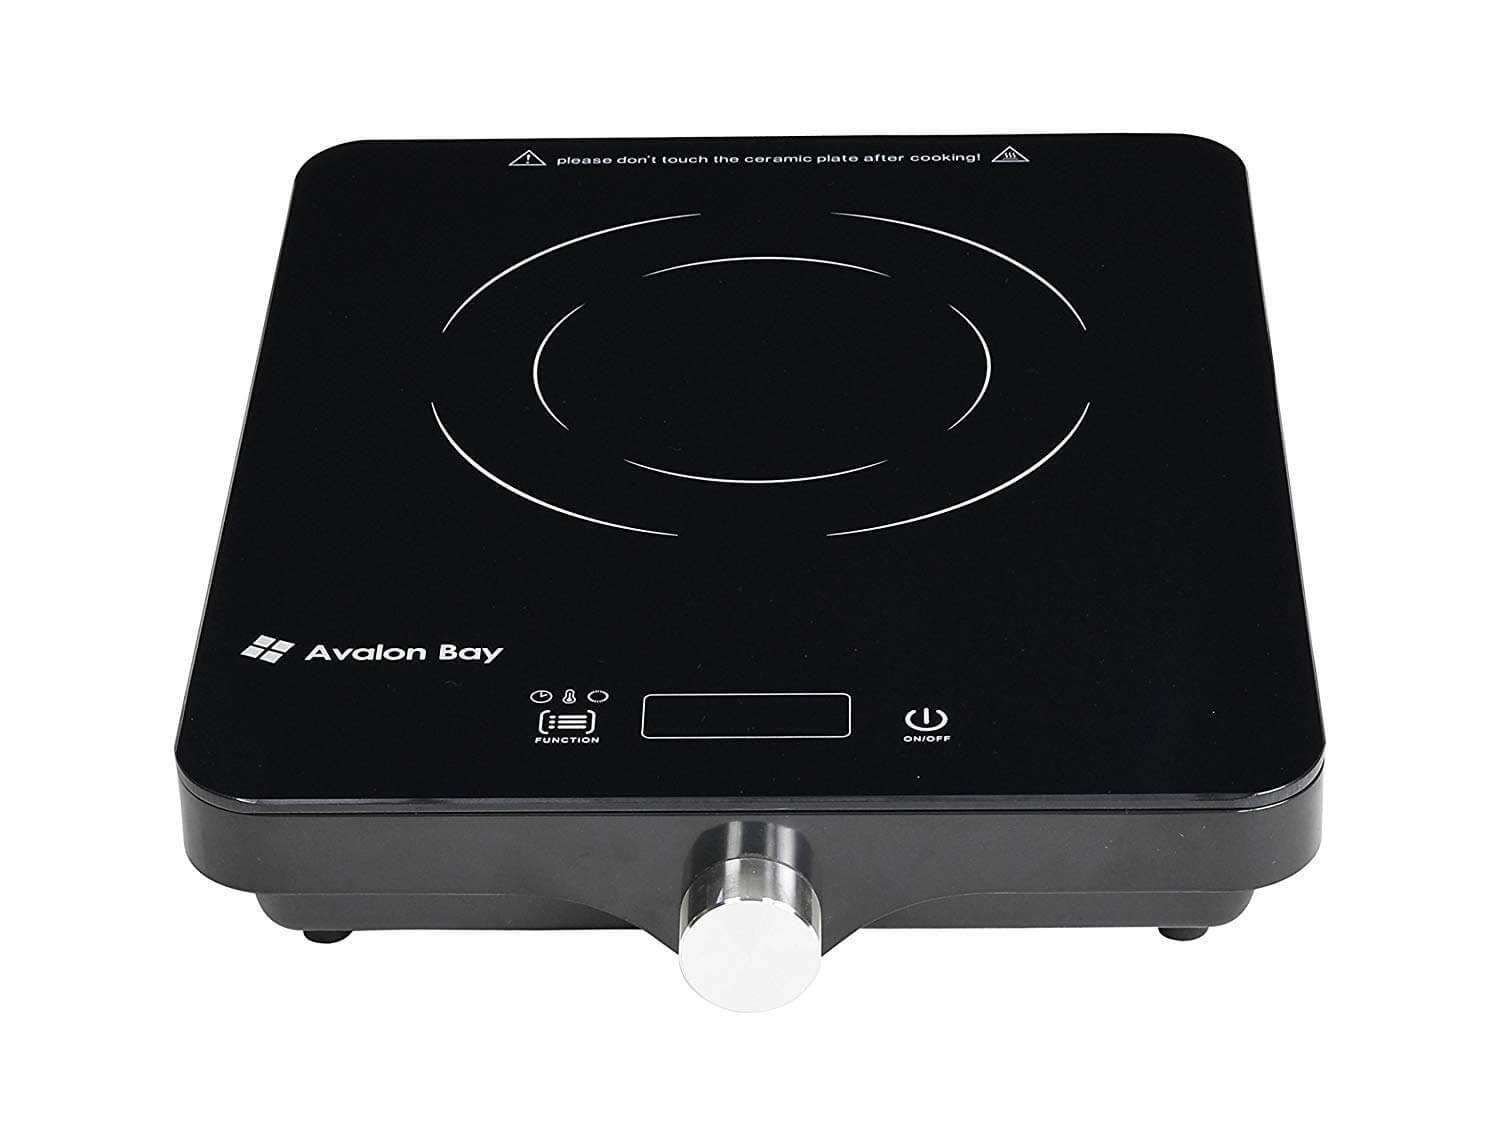 Avalon Bay Portable Induction Cooker Cooktop Countertop Burner, IC100B